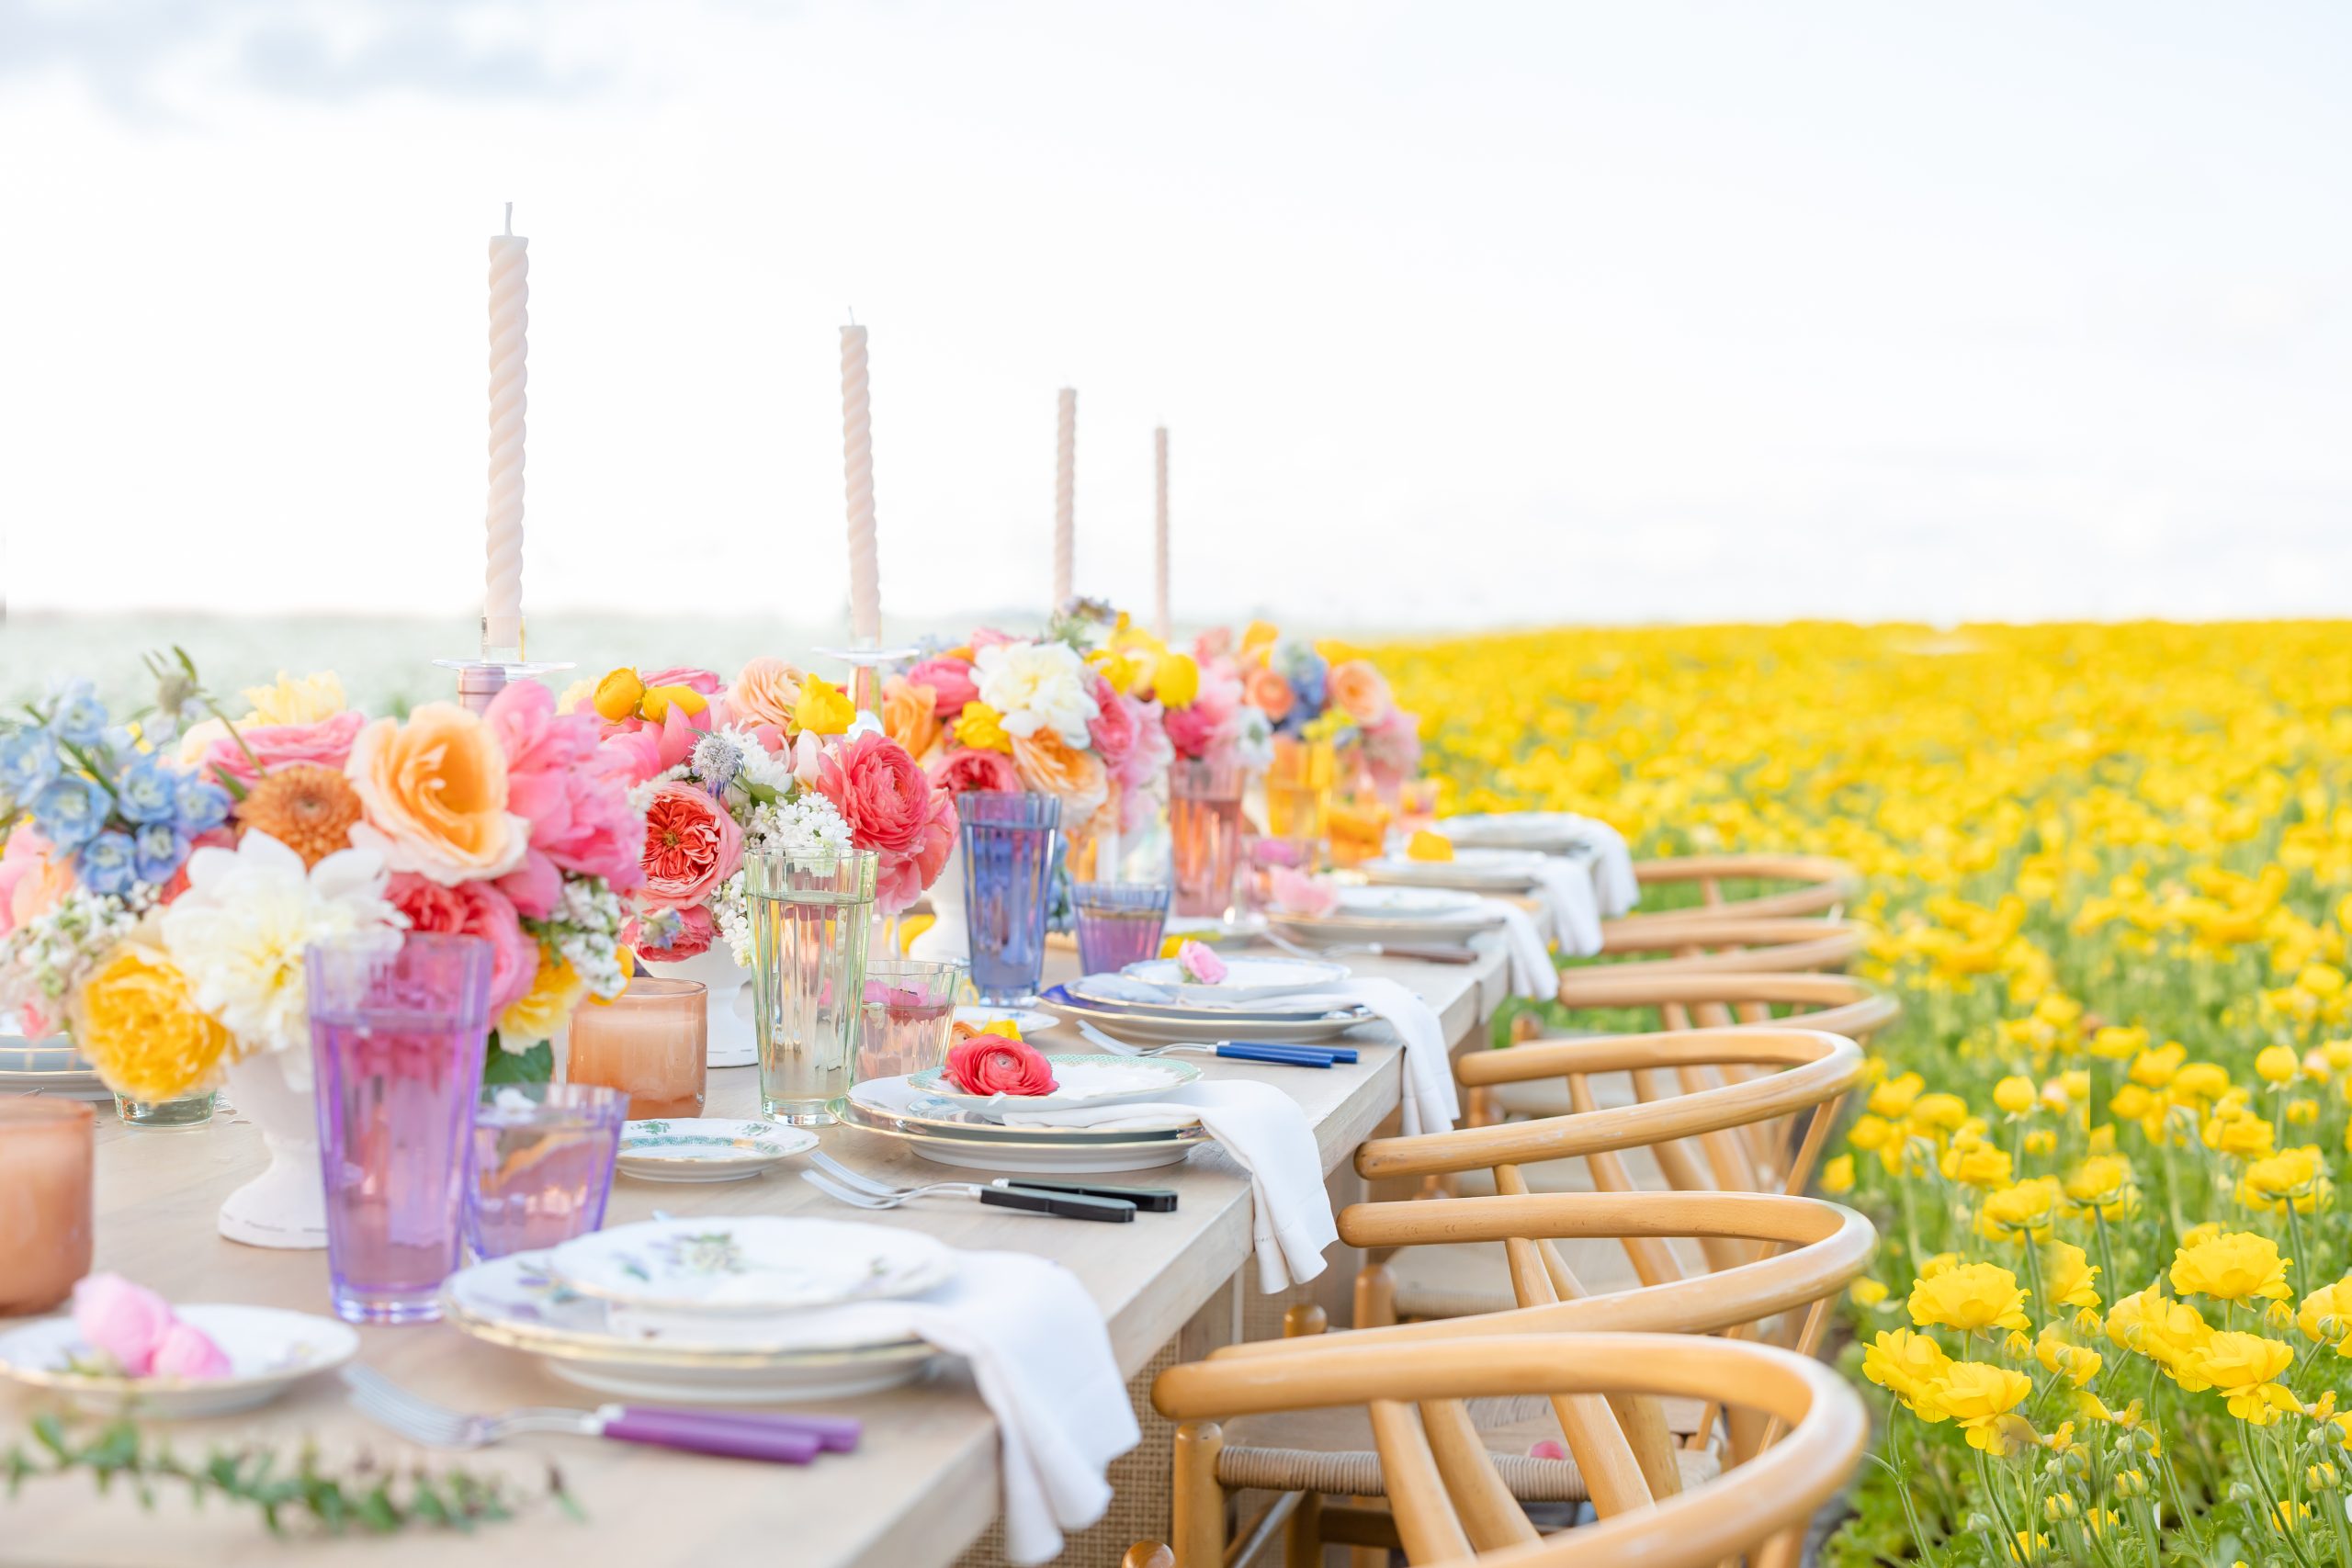 Living for Spring in the Flower Fields with Estelle Colored Glassware